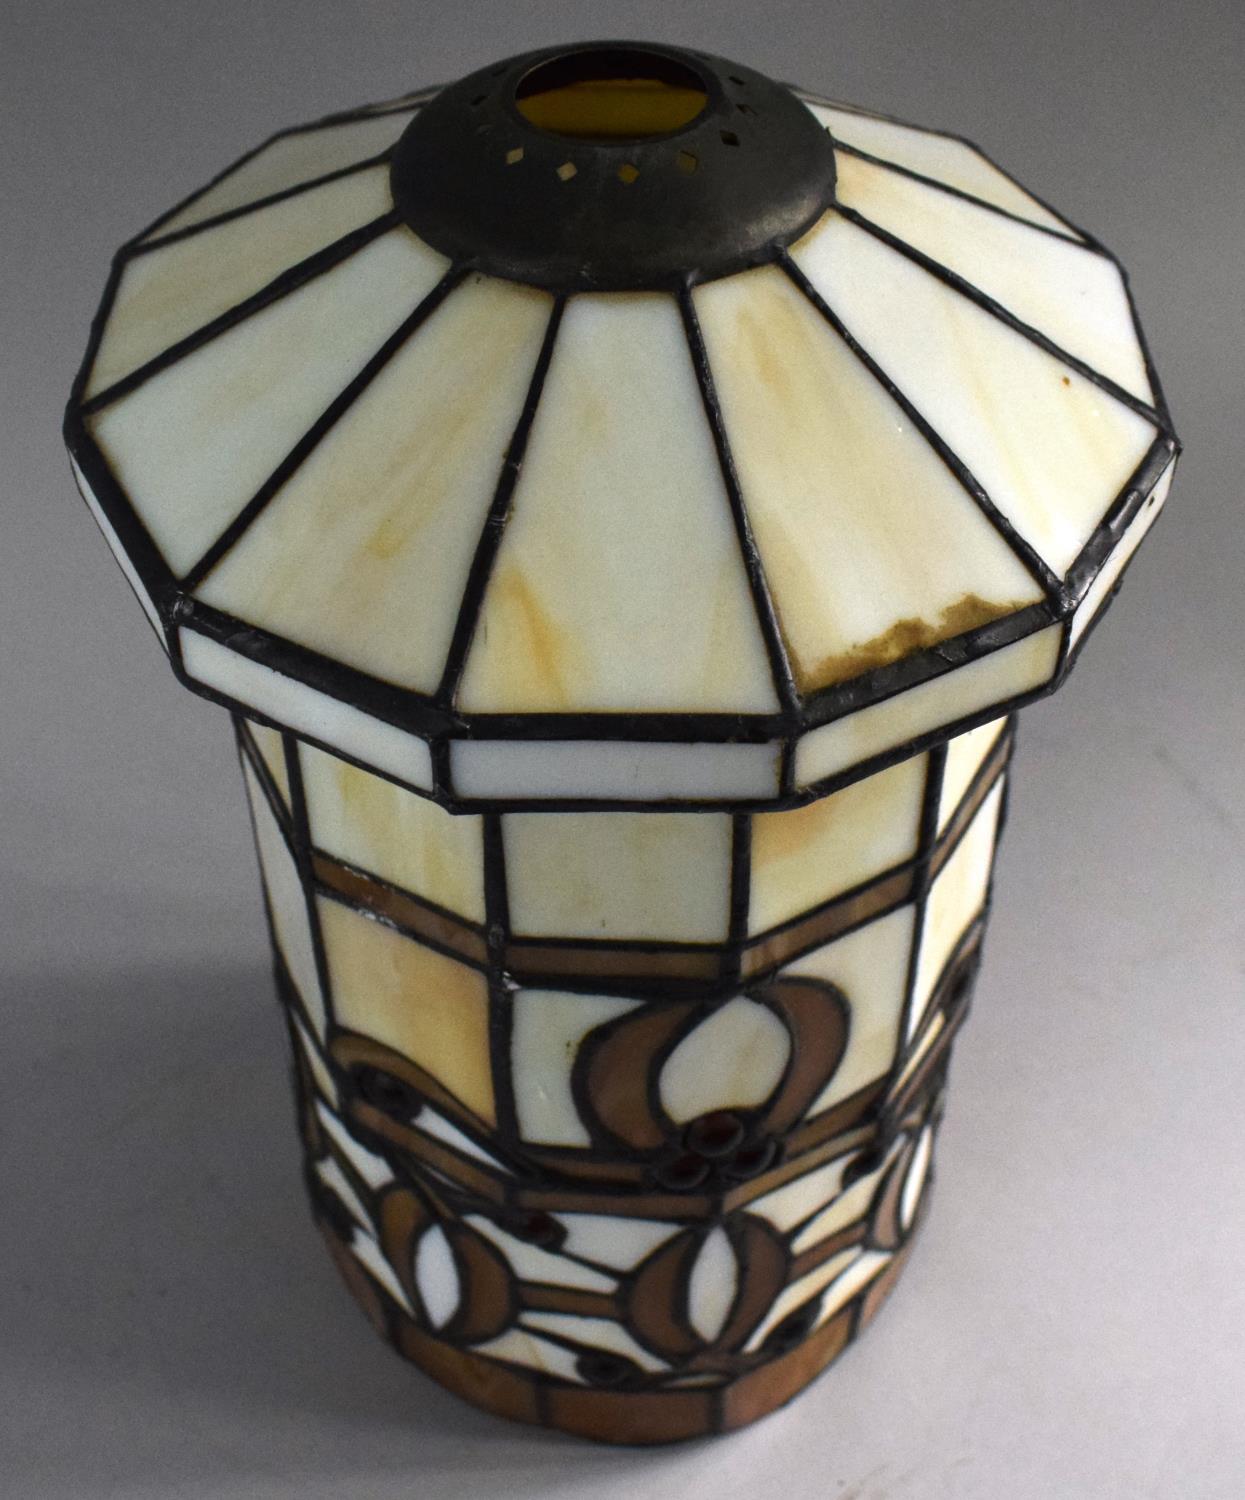 A Reproduction Cylindrical Tiffany Style Lamp Shade, 30cm High - Image 3 of 3